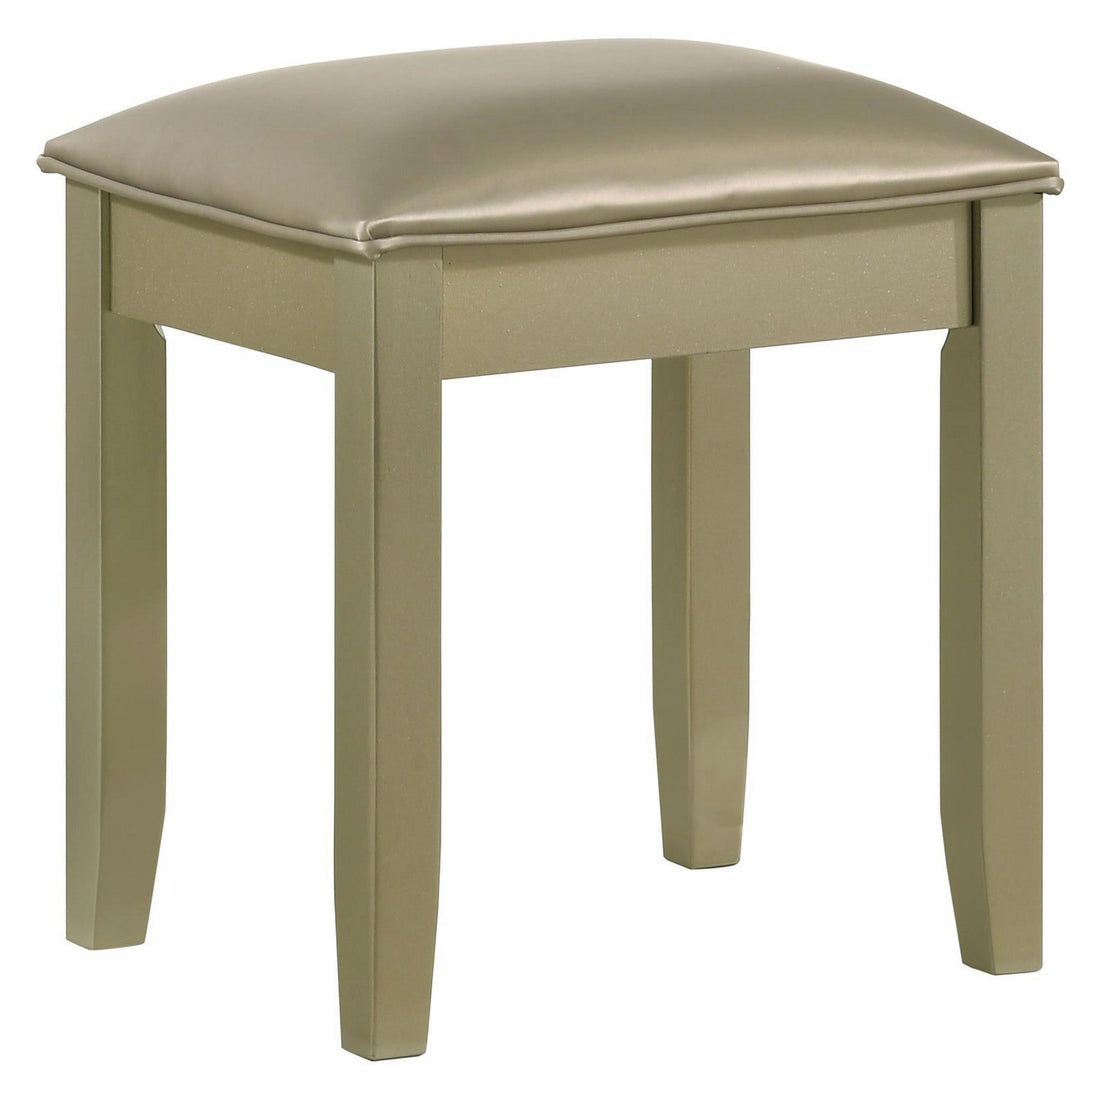 Beaumont Upholstered Vanity Stool Champagne Gold and Champagne 205297STL